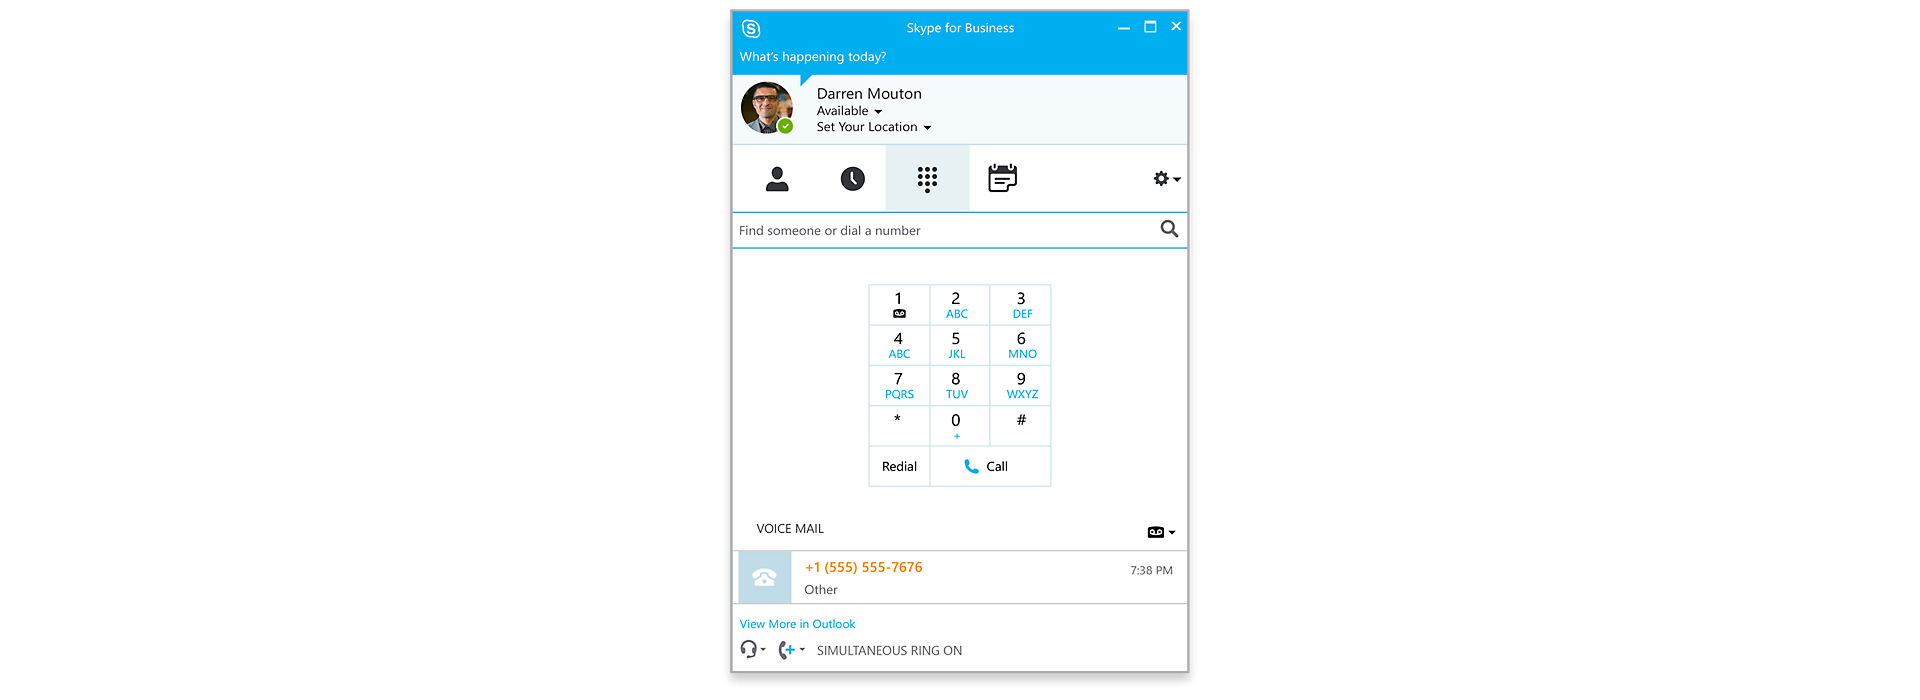 The dial screen in Skype for Business